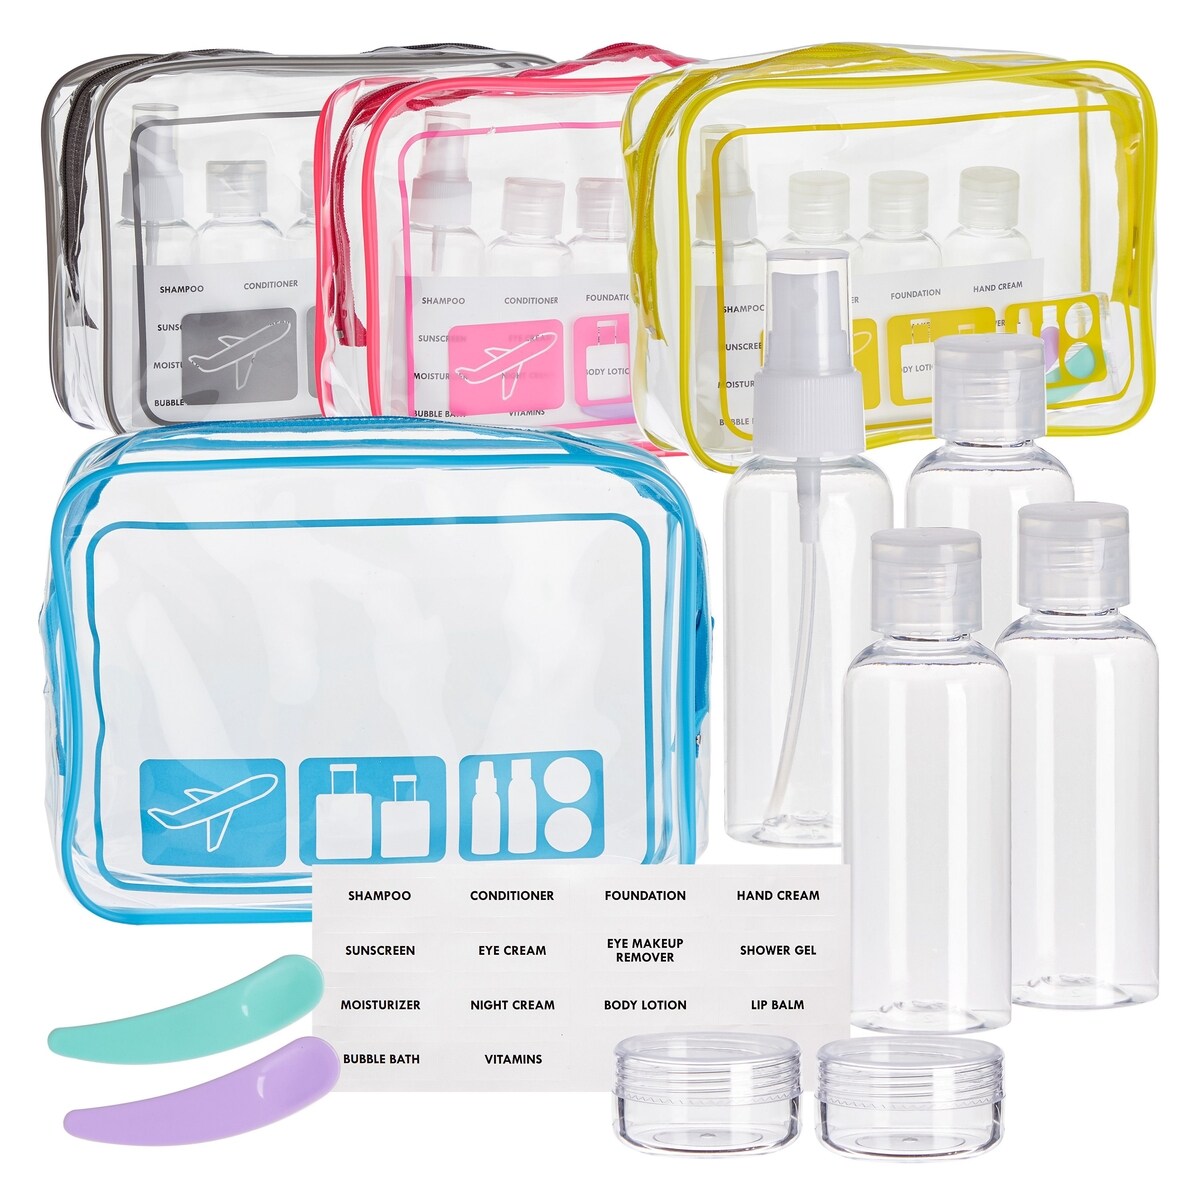 Clear Makeup Bag Toiletry Bag With Zipper Letter Pvc Waterproof Small  Cosmetic Case Vacation Bathroom Wash Bag Travel Set